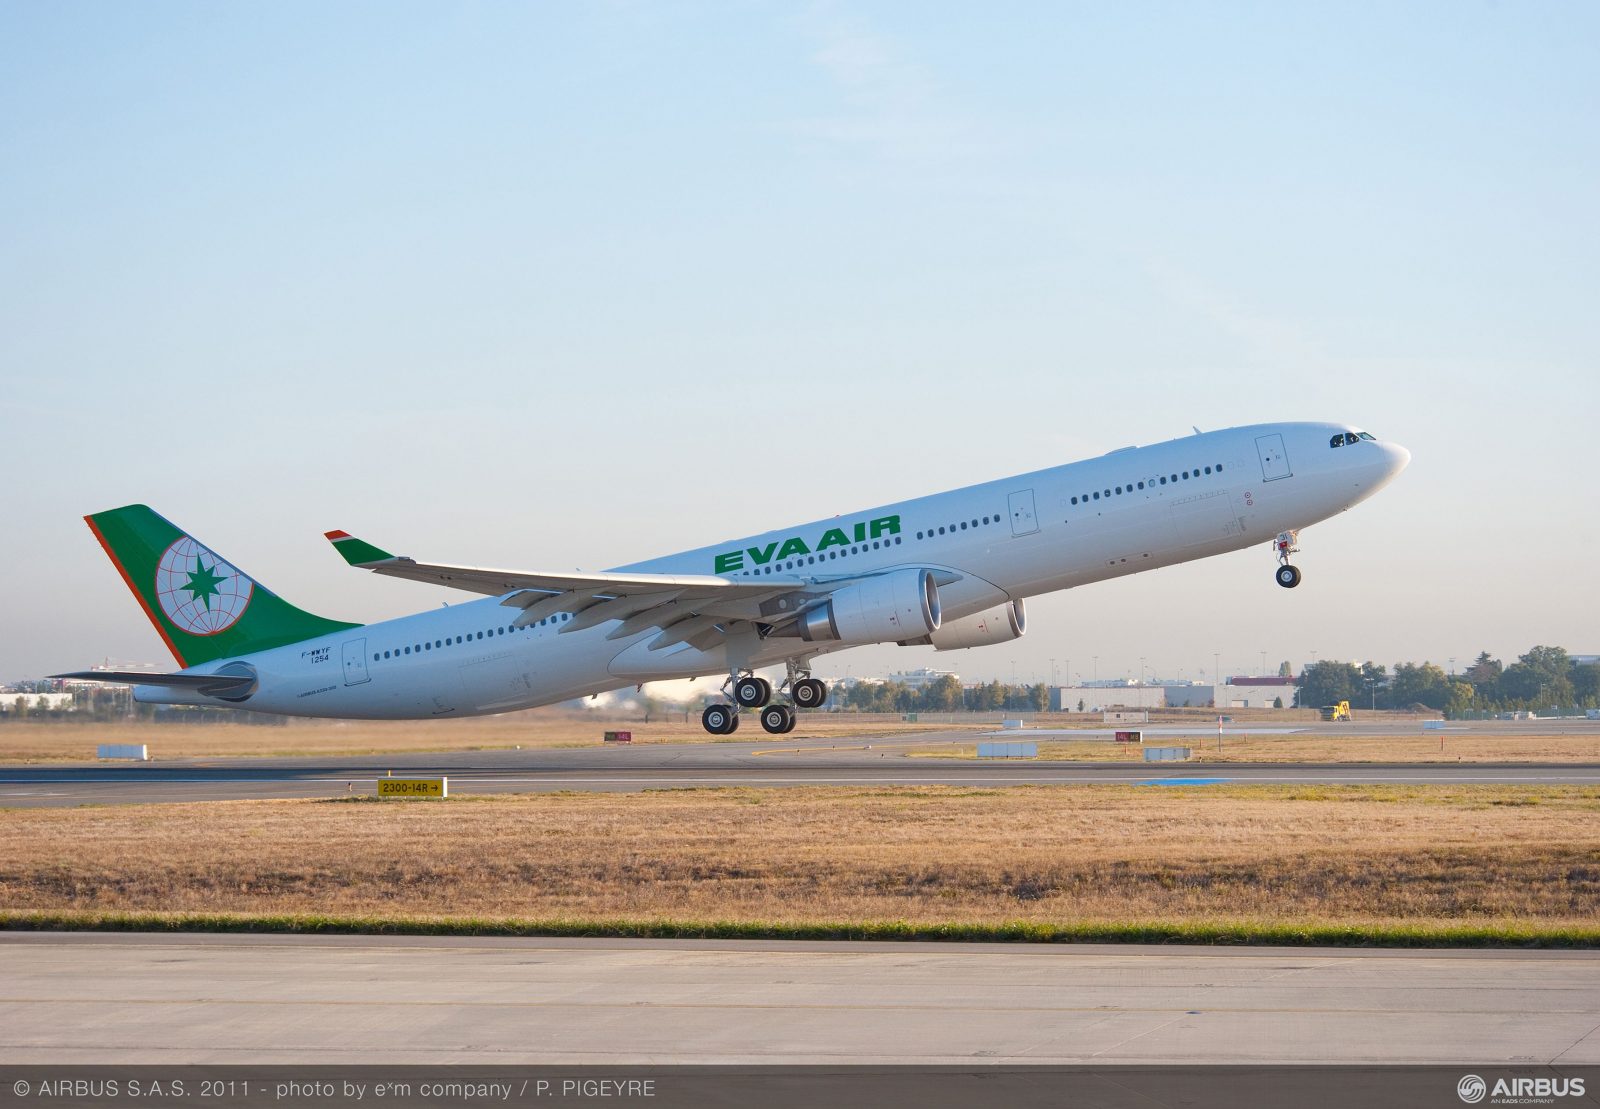 The EVA Air Cabin Crew Strike is Coming to an End - But Disruption Expected Until End of July